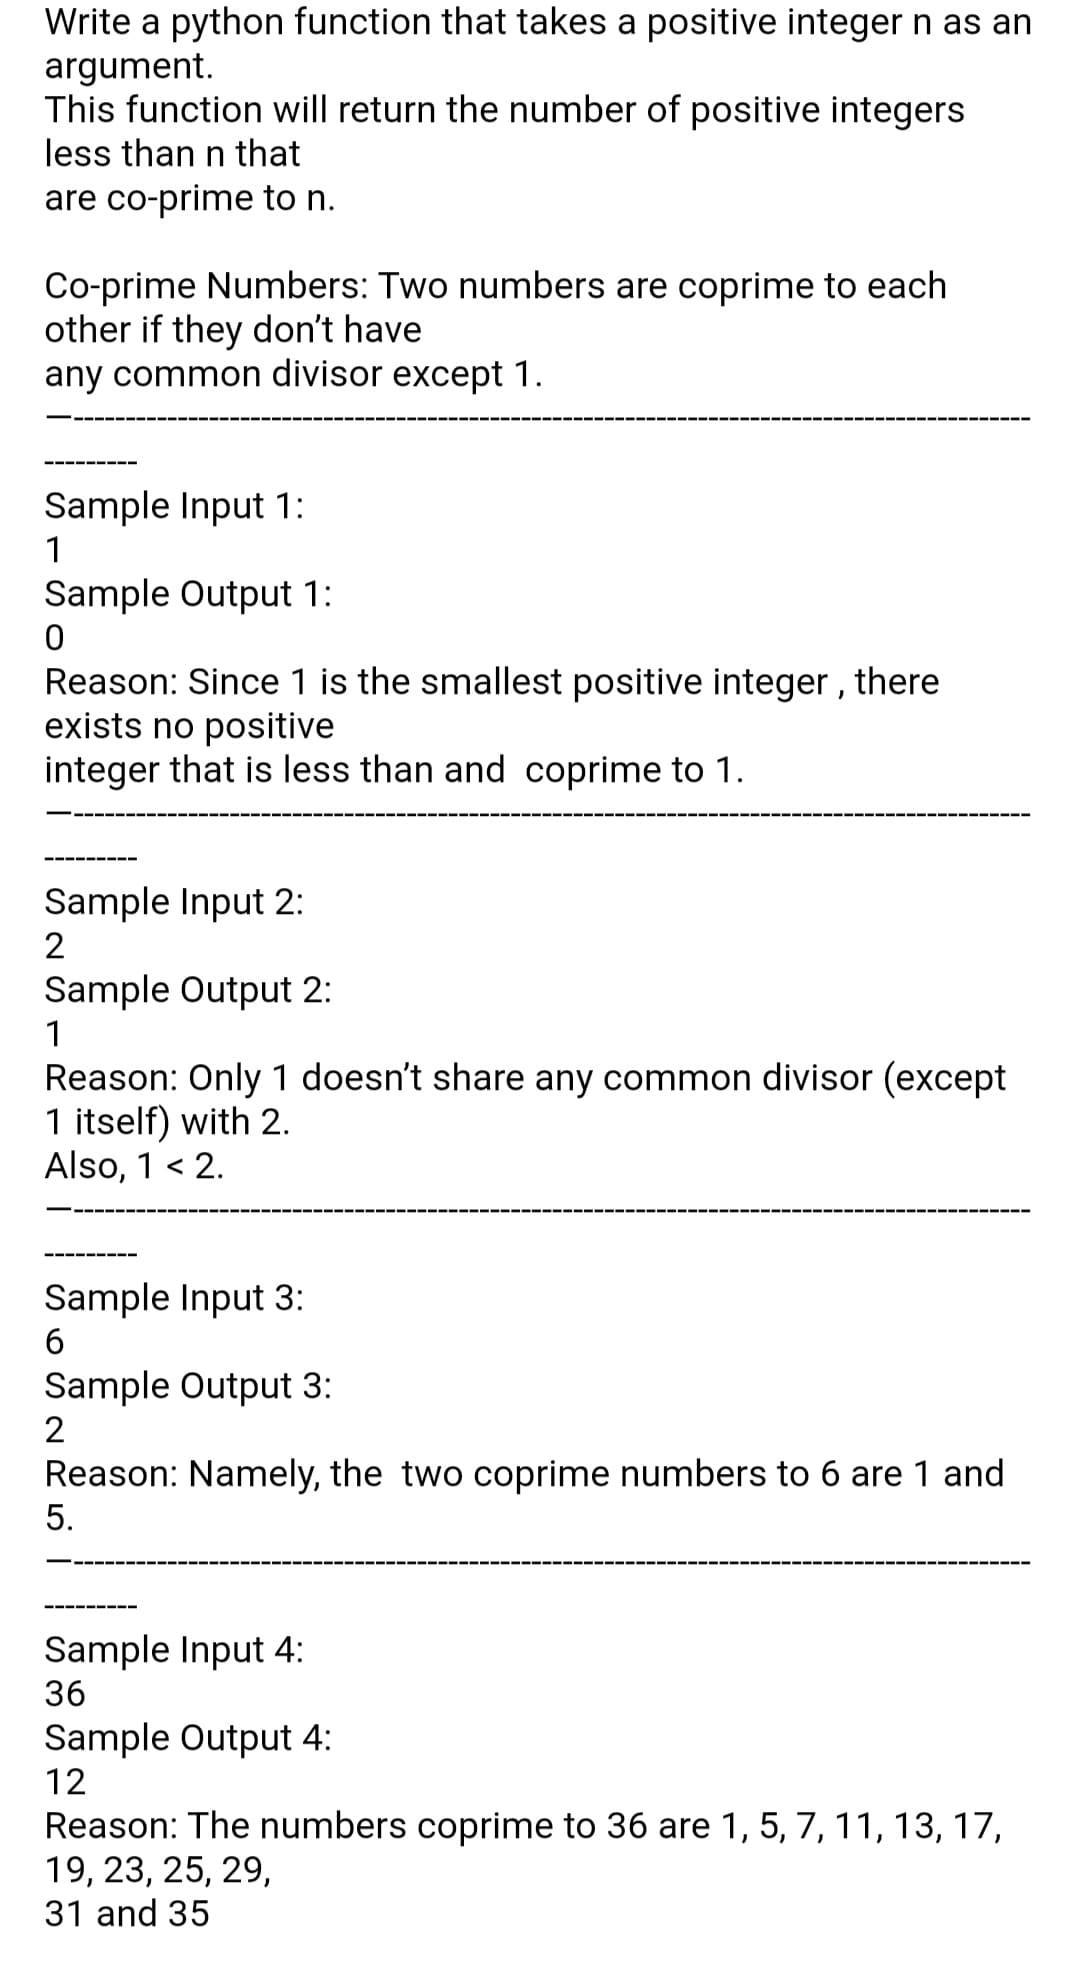 Write a python function that takes a positive integer n as an
argument.
This function will return the number of positive integers
less than n that
are co-prime to n.
Co-prime Numbers: Two numbers are coprime to each
other if they don't have
any common divisor except 1.
Sample Input 1:
1
Sample Output 1:
Reason: Since 1 is the smallest positive integer, there
exists no positive
integer that is less than and coprime to 1.
Sample Input 2:
2
Sample Output 2:
1
Reason: Only 1 doesn't share any common divisor (except
1 itself) with 2.
Also, 1 < 2.
Sample Input 3:
Sample Output 3:
Reason: Namely, the two coprime numbers to 6 are 1 and
5.
Sample Input 4:
36
Sample Output 4:
12
Reason: The numbers coprime to 36 are 1, 5, 7, 11, 13, 17,
19, 23, 25, 29,
31 and 35
